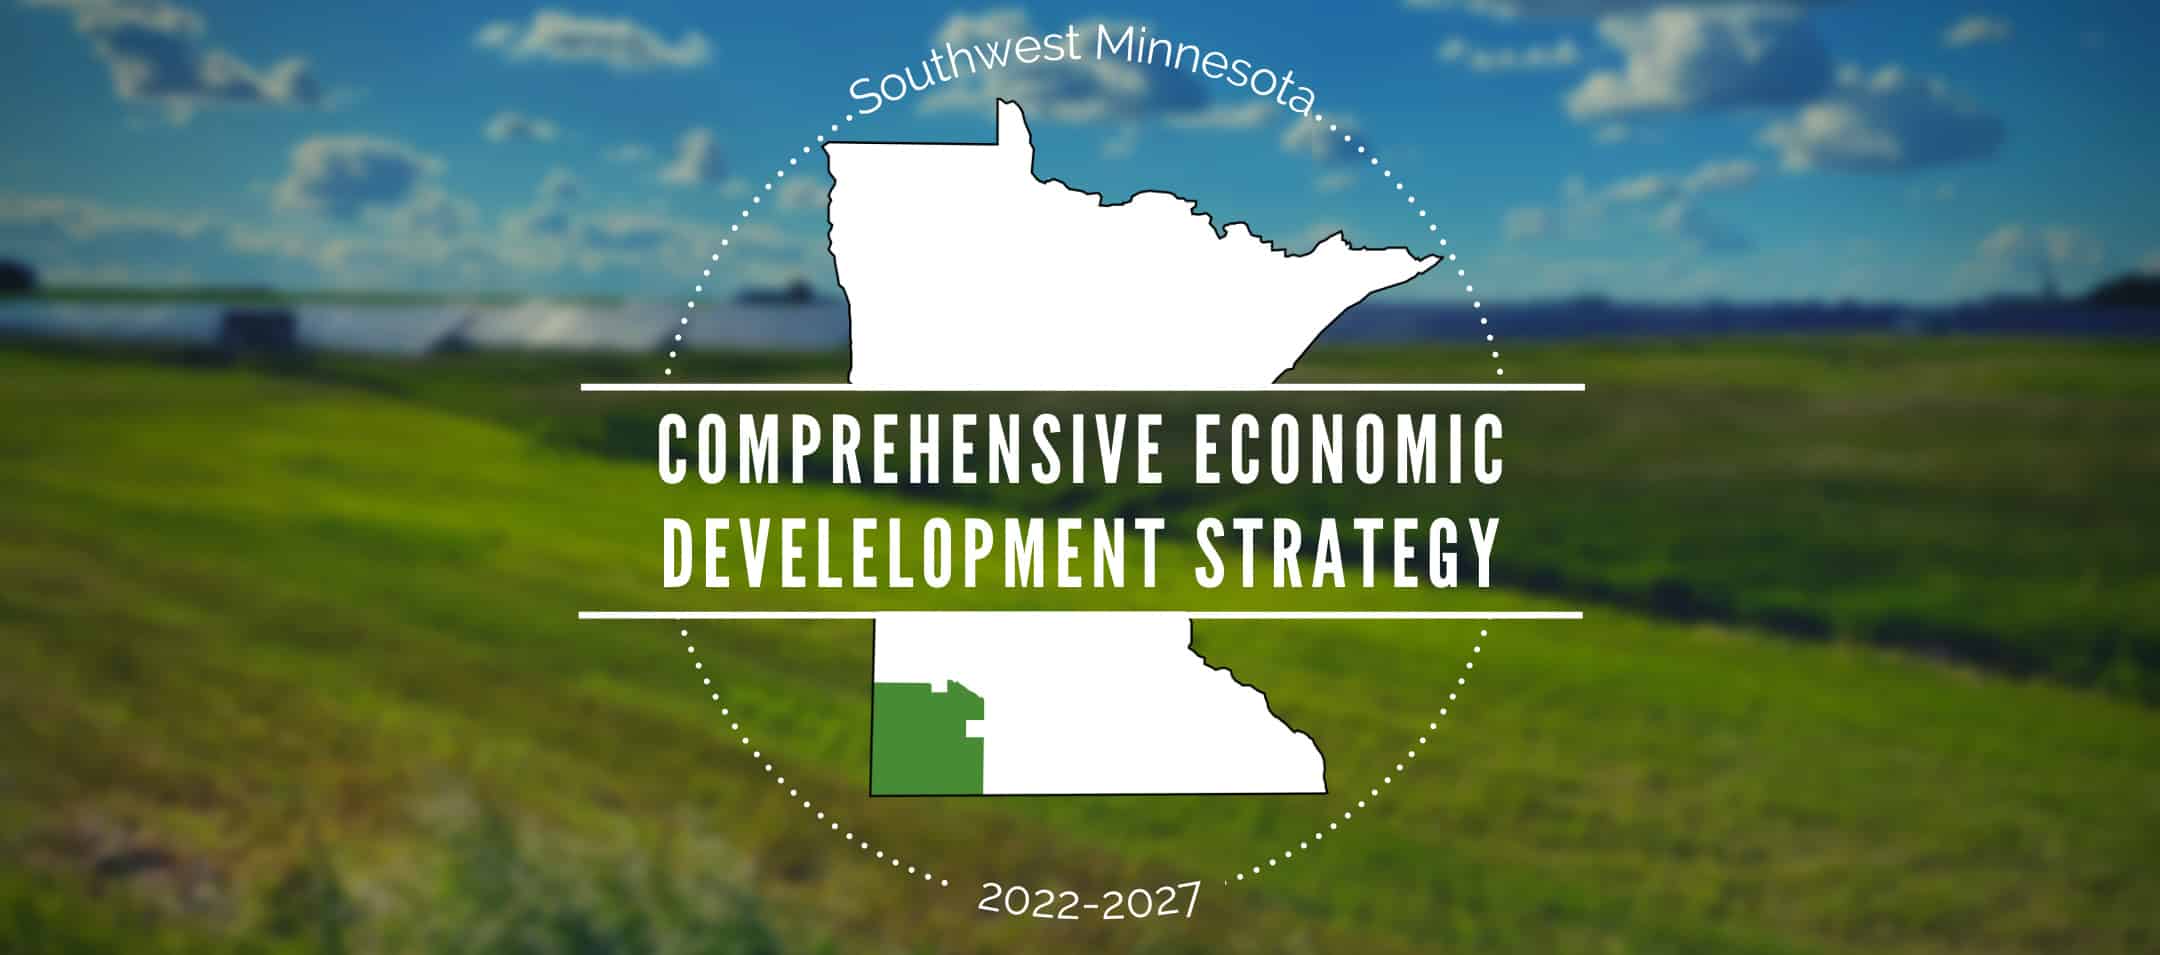 Background: solar field surrounded by covercrop, Minnesota icon in front with Southwest Minnesota Region highlighted